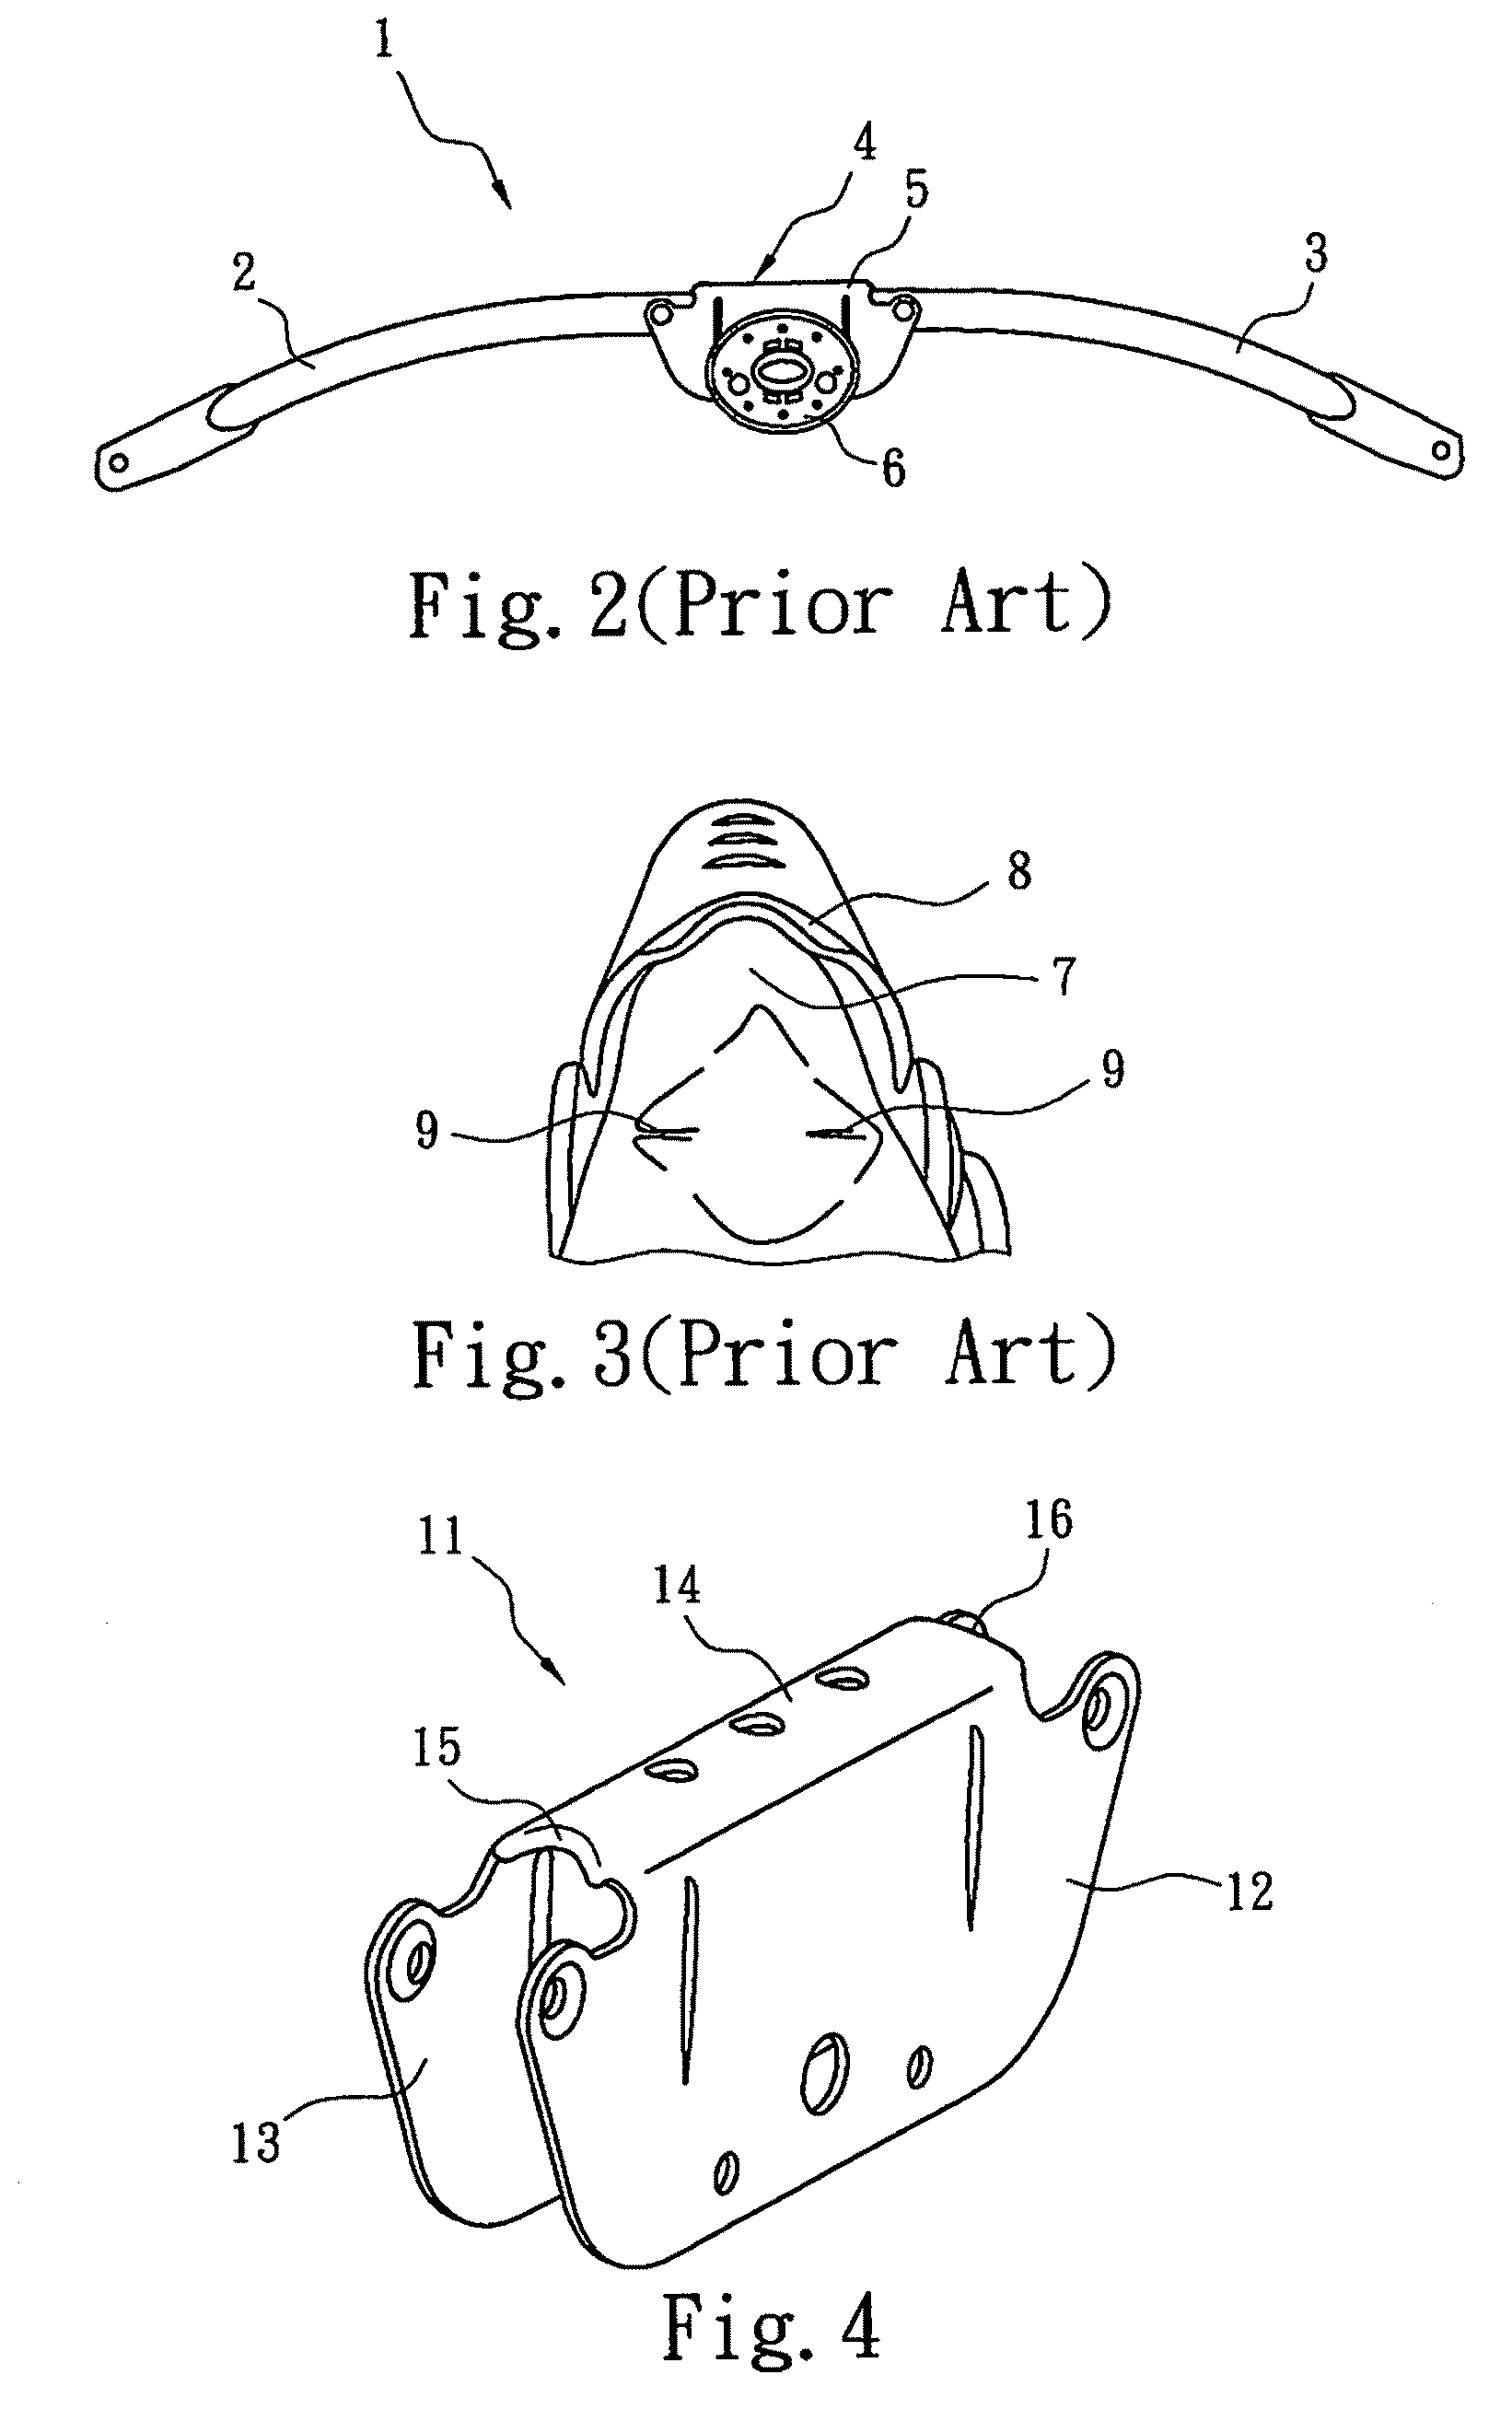 Joining device for rails of a baby bed